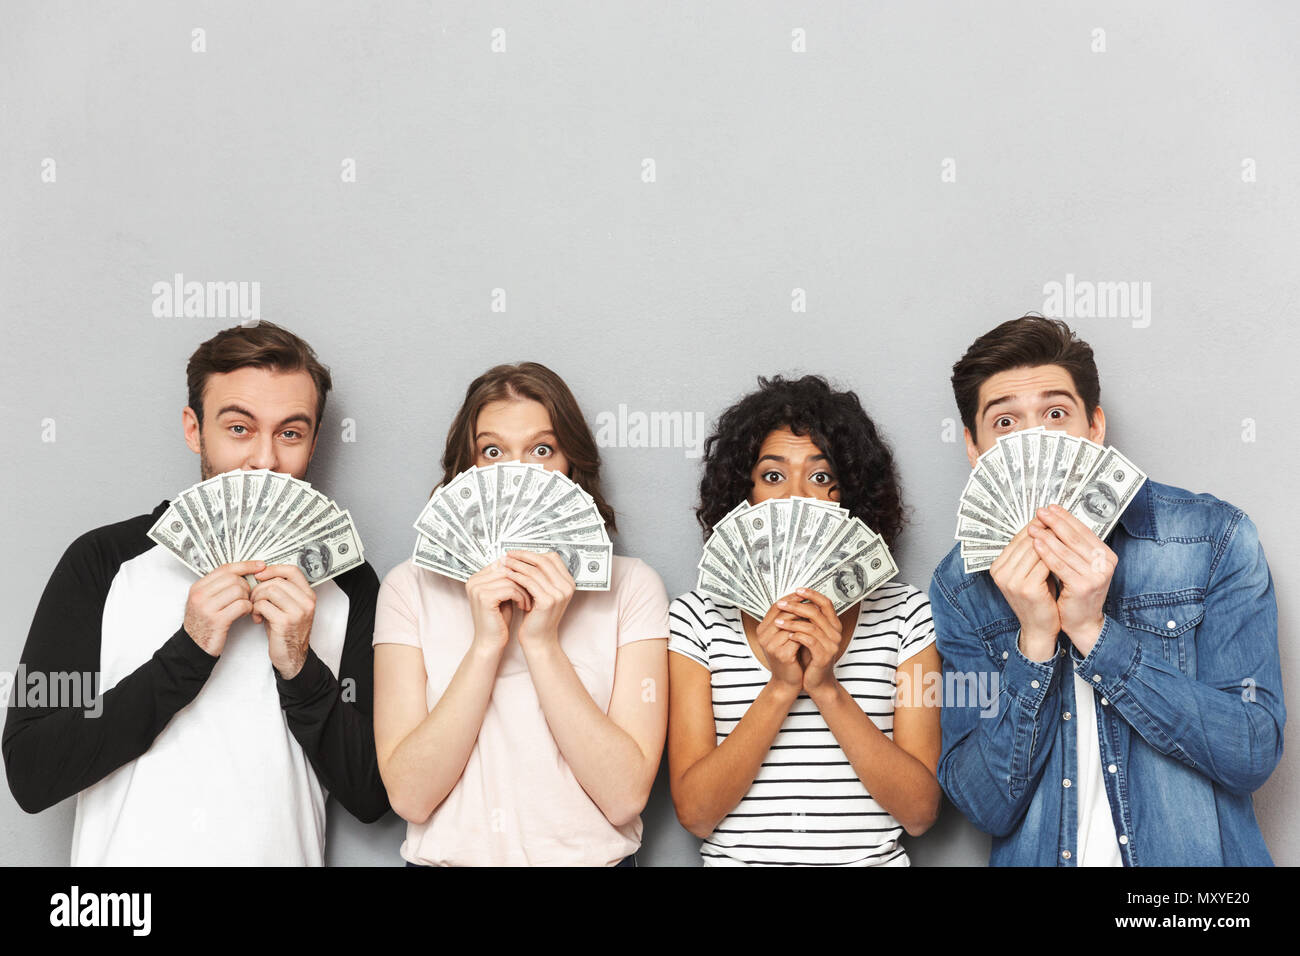 Image of emotionl group of friends standing isolated over grey wall background looking camera holding money covering faces. Stock Photo